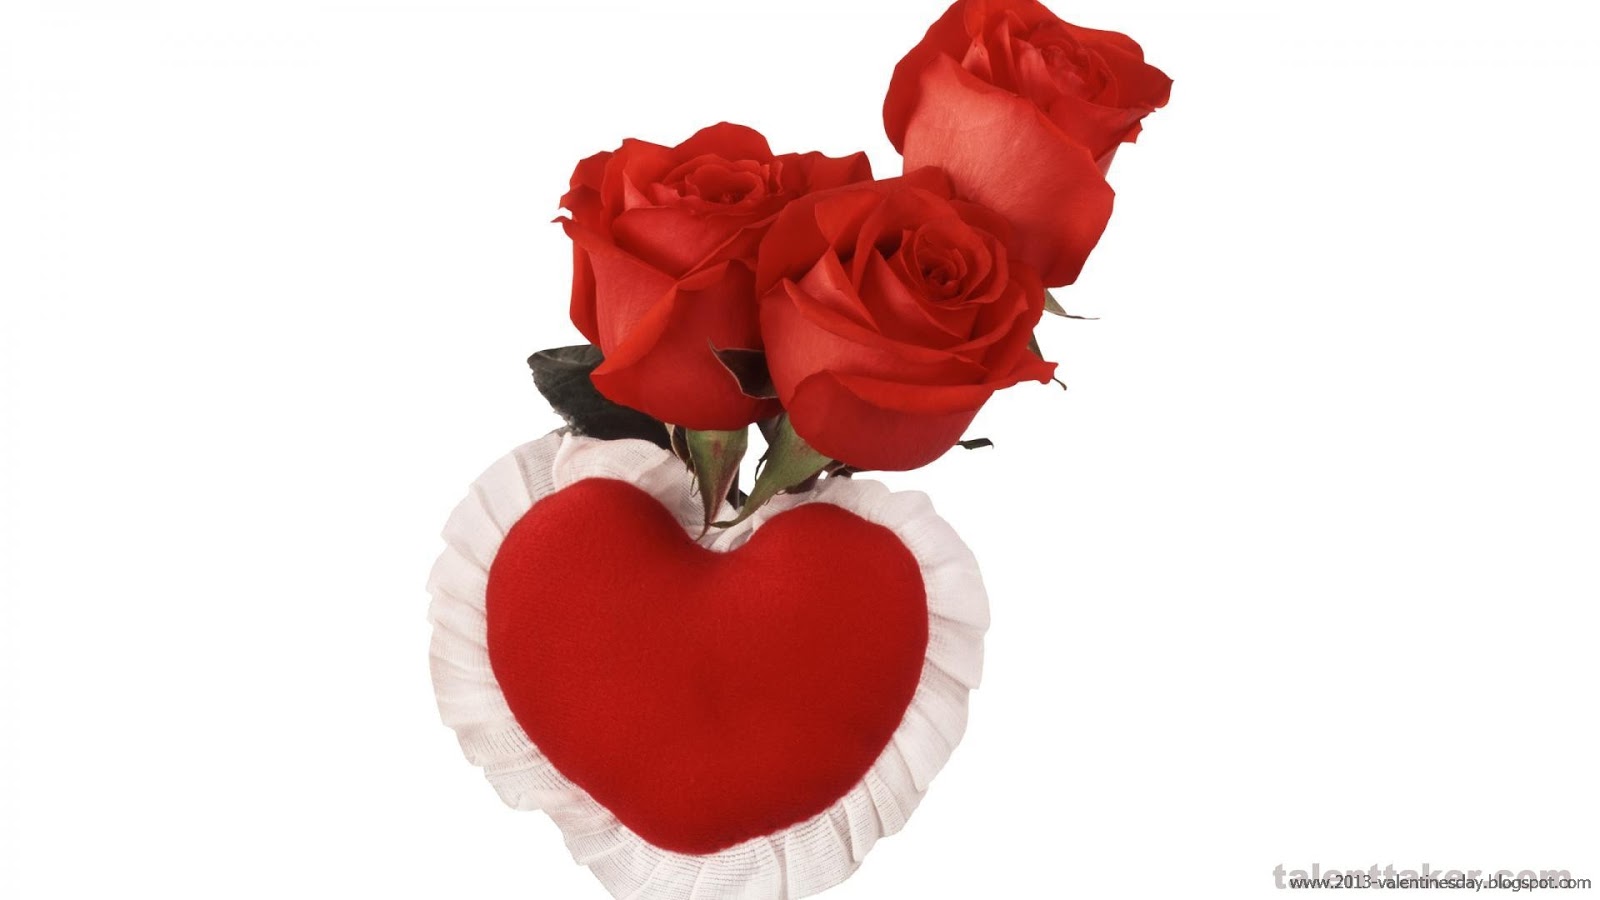 3. New Latest Happy Rose Day 2014 Hd Wallpapers